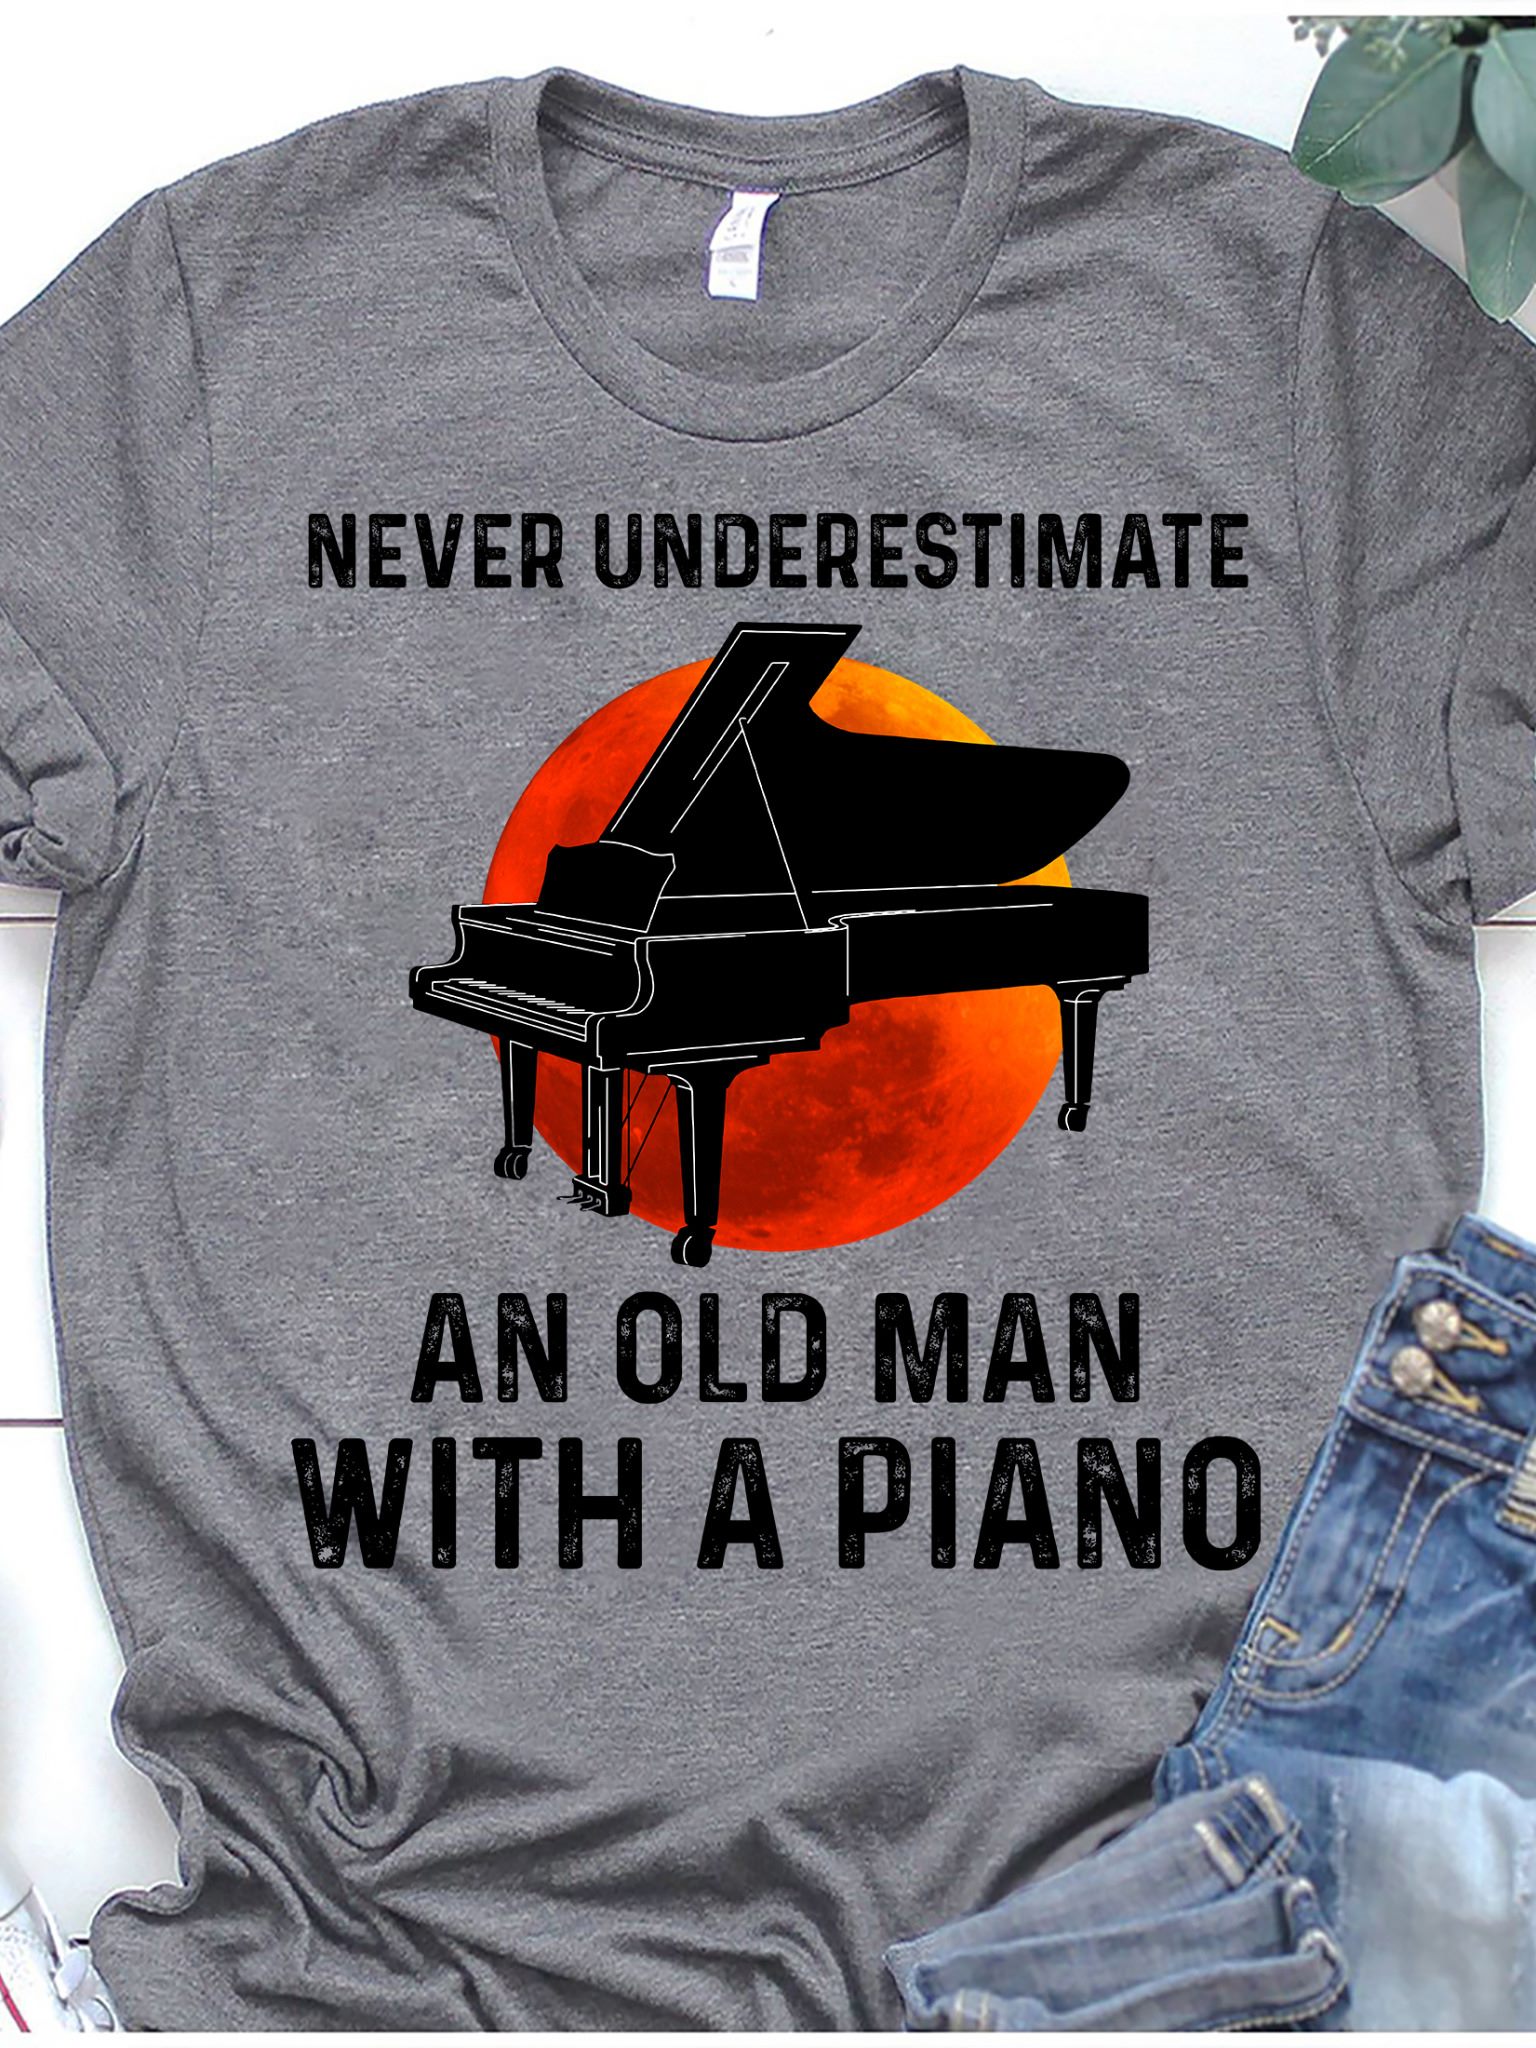 Never underestimate an old man with a piano